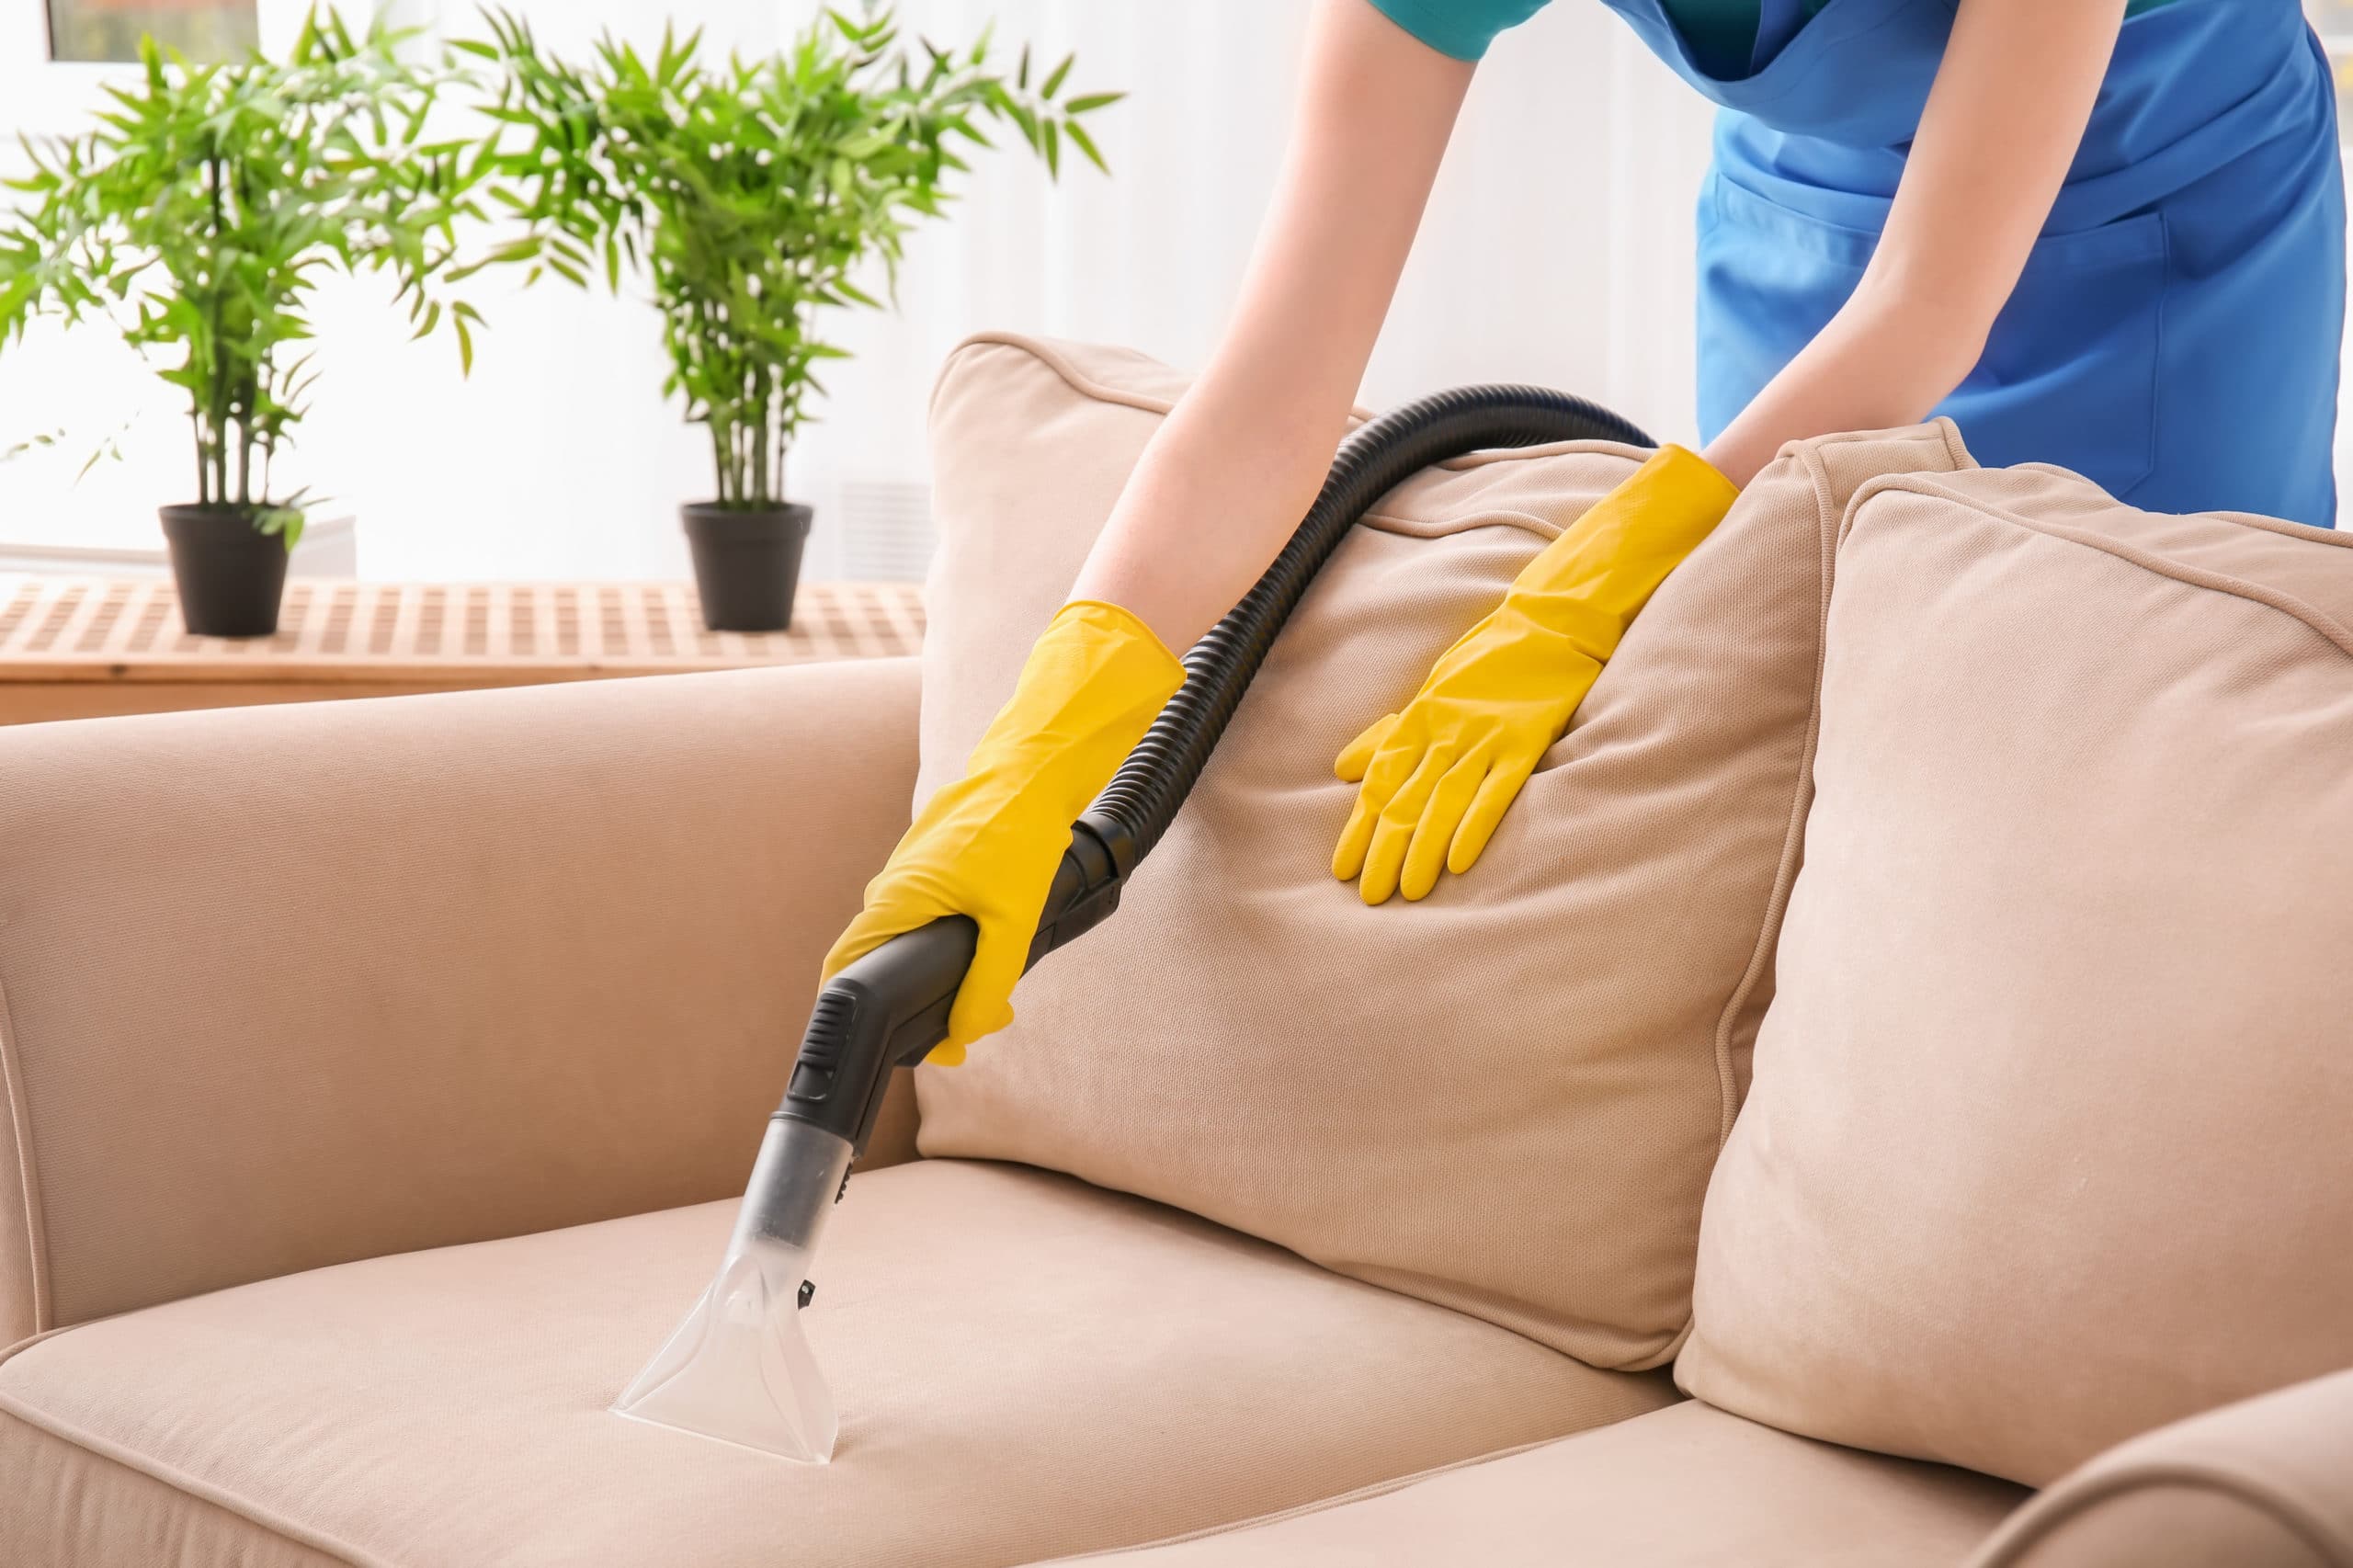 Lady cleaner cleaning upholstery